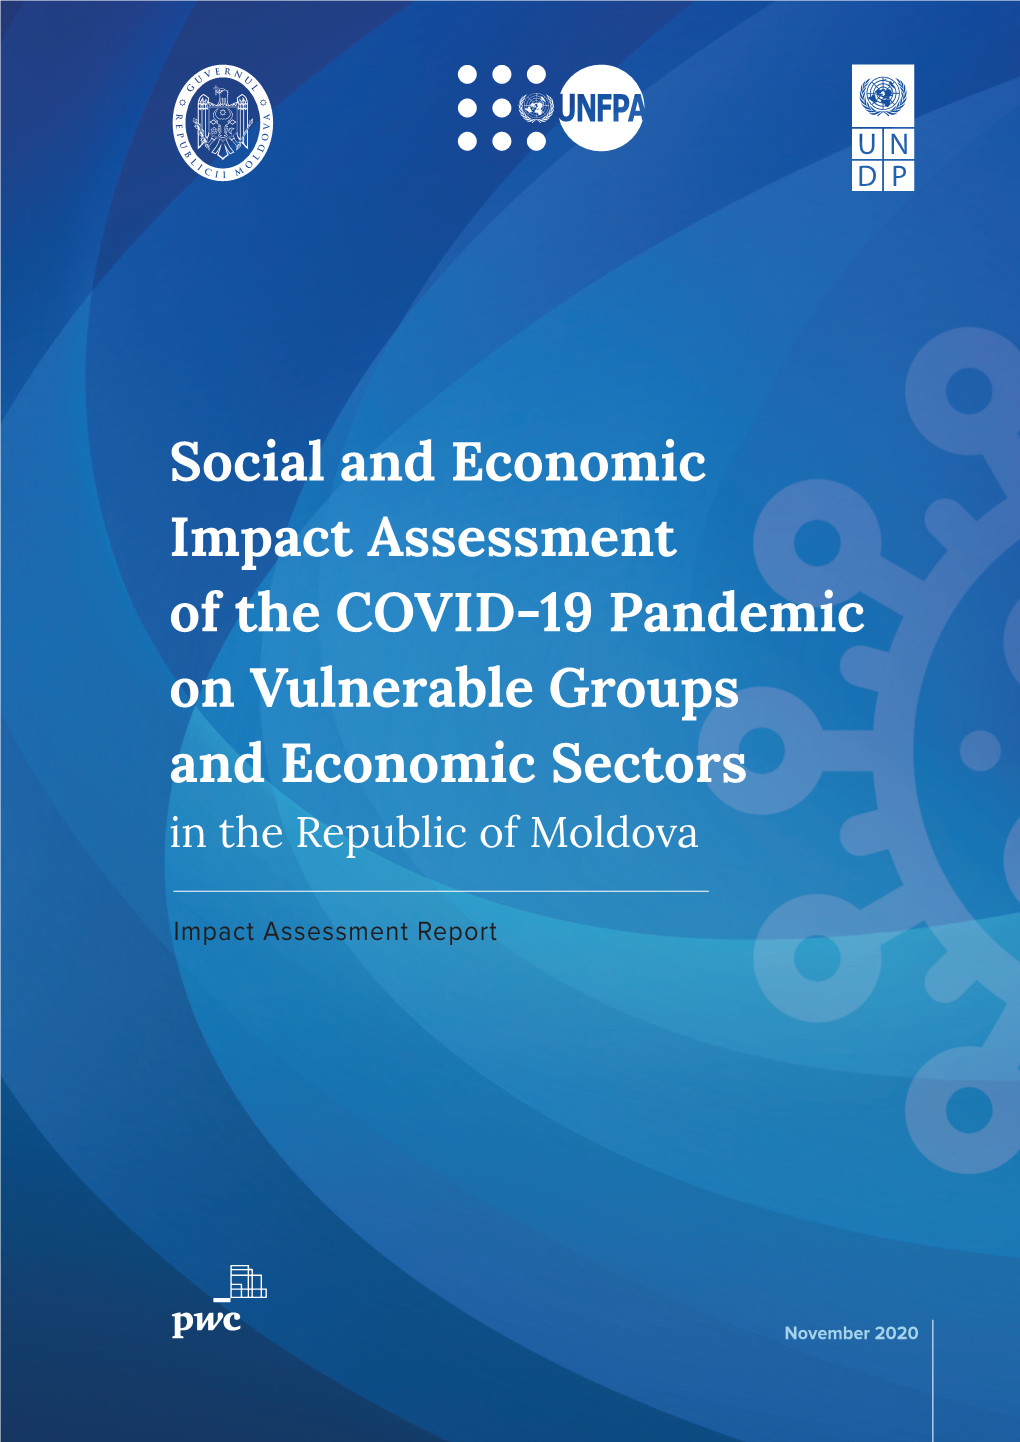 Social and Economic Impact Assessment of the COVID-19 Pandemic on Vulnerable Groups and Economic Sectors in the Republic of Moldova